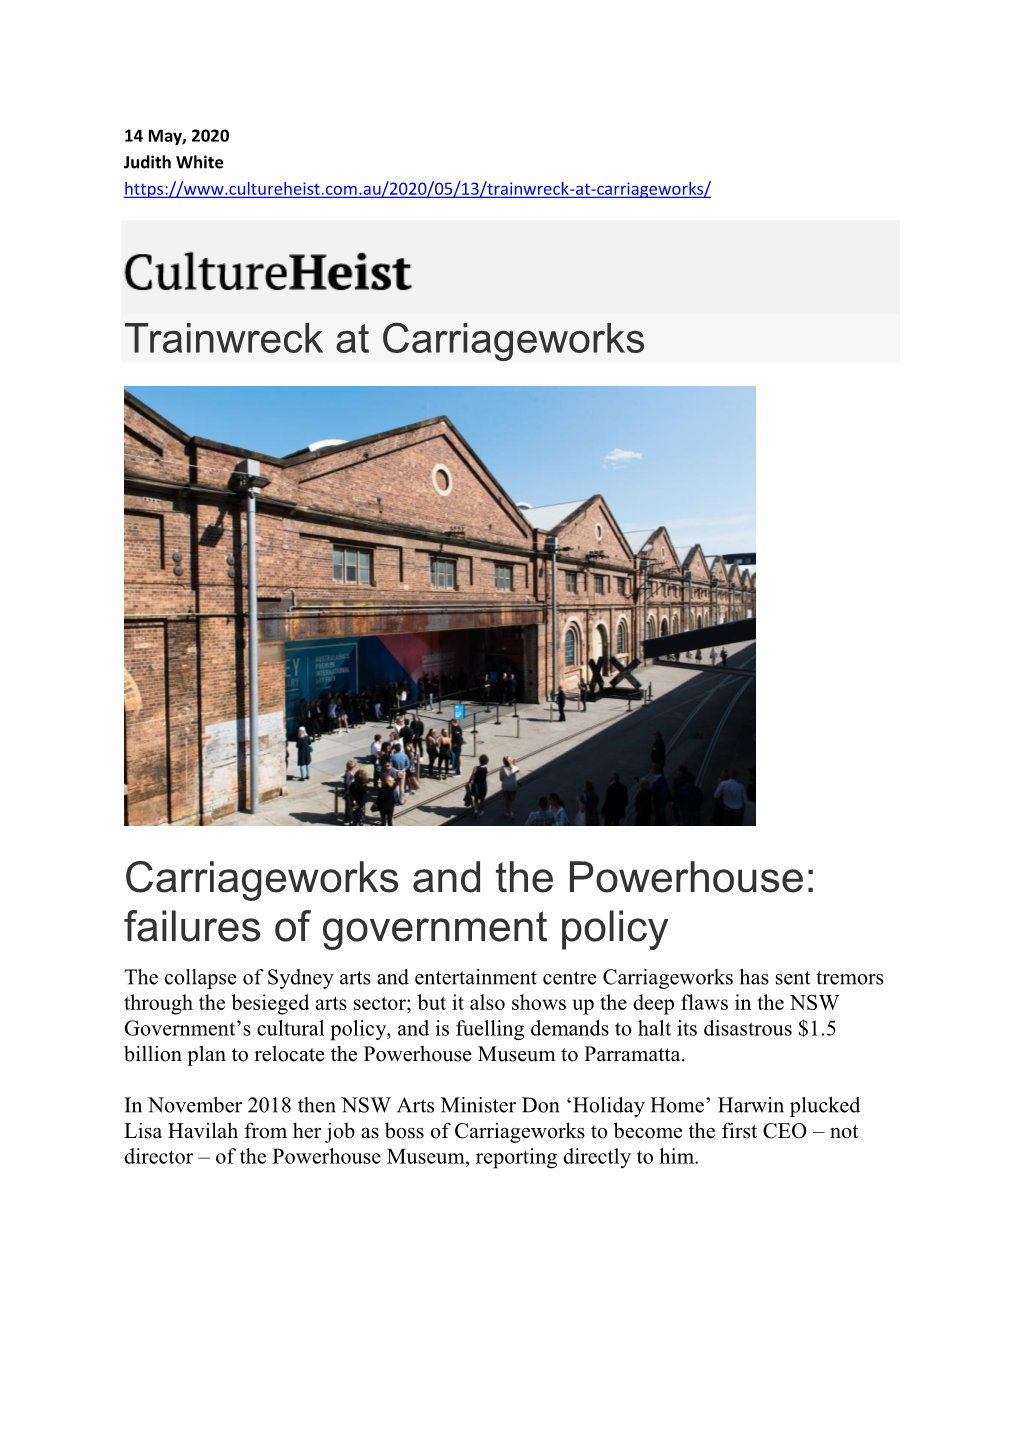 Carriageworks and the Powerhouse: Failures of Government Policy